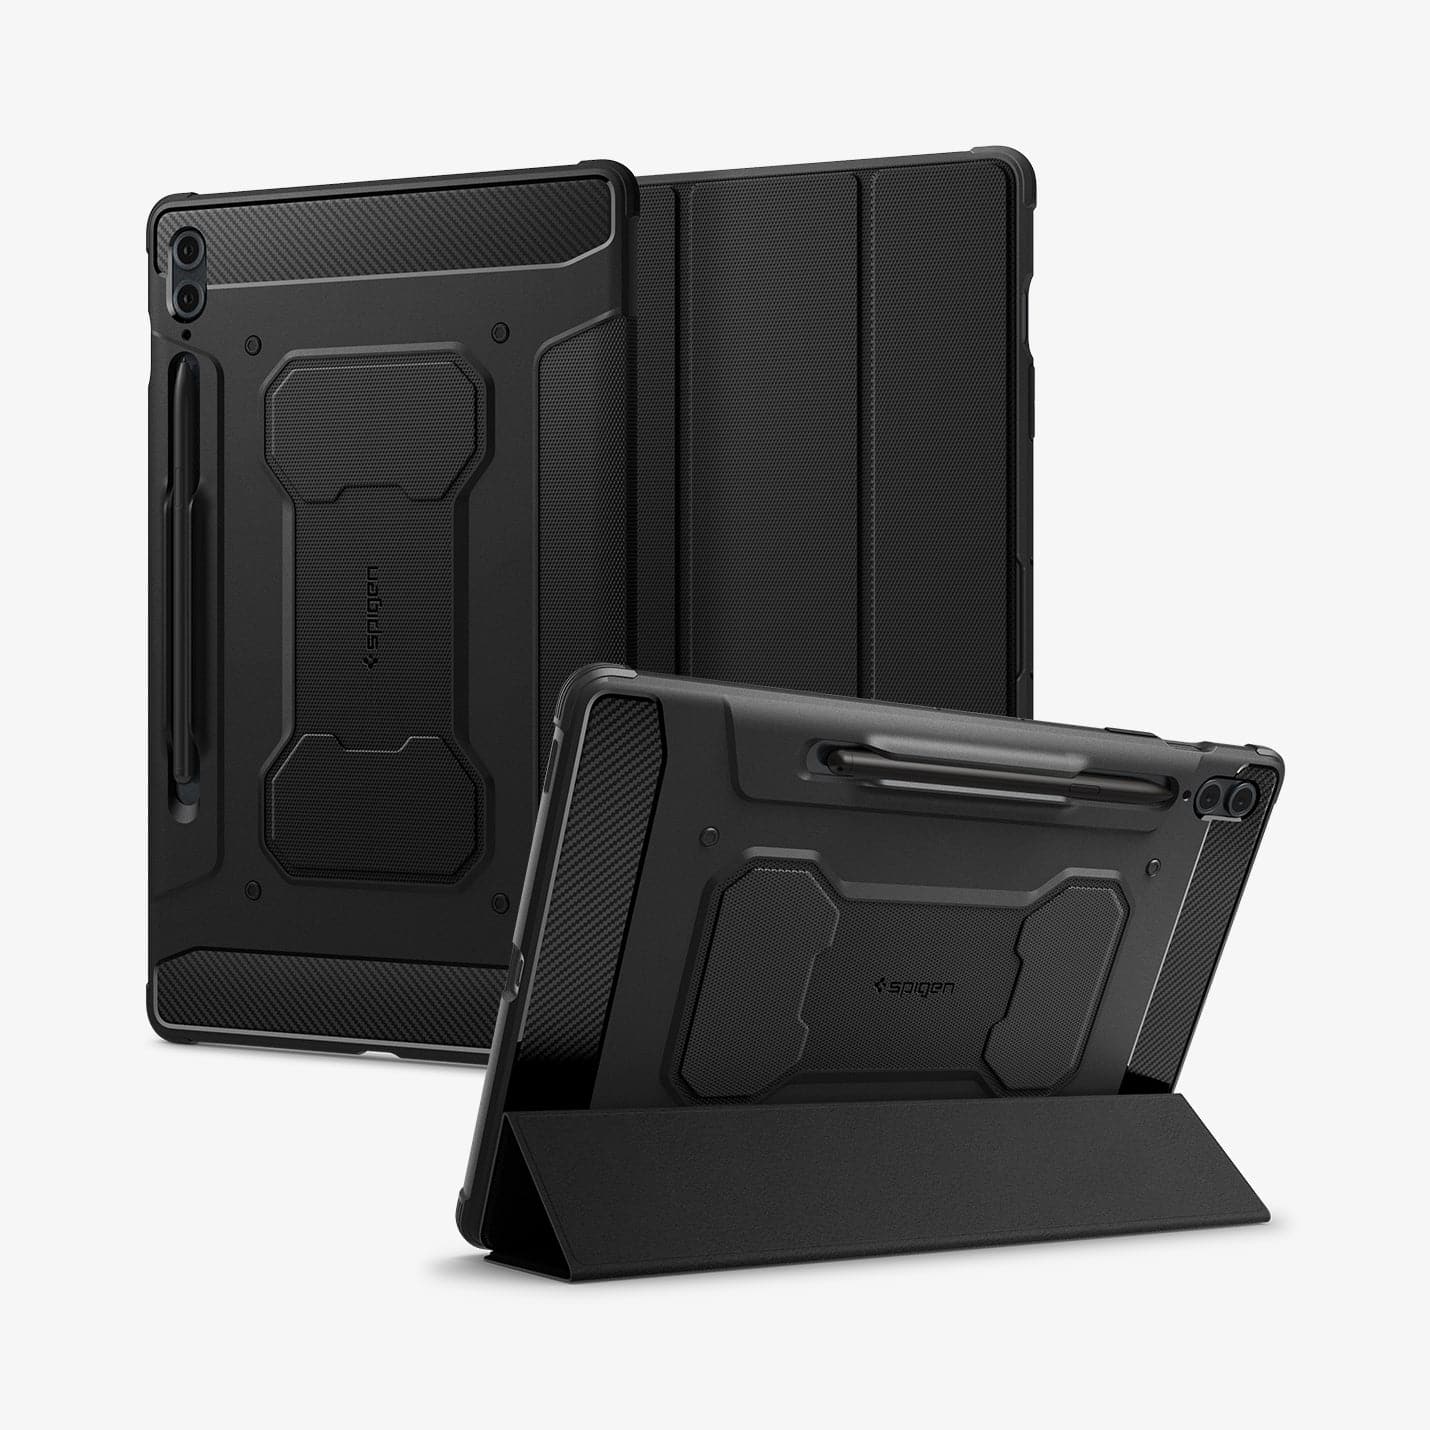 ACS06856 - Galaxy Tab S9 FE+ Case Rugged Armor Pro in black showing the back, front and device propped up by built in kickstand